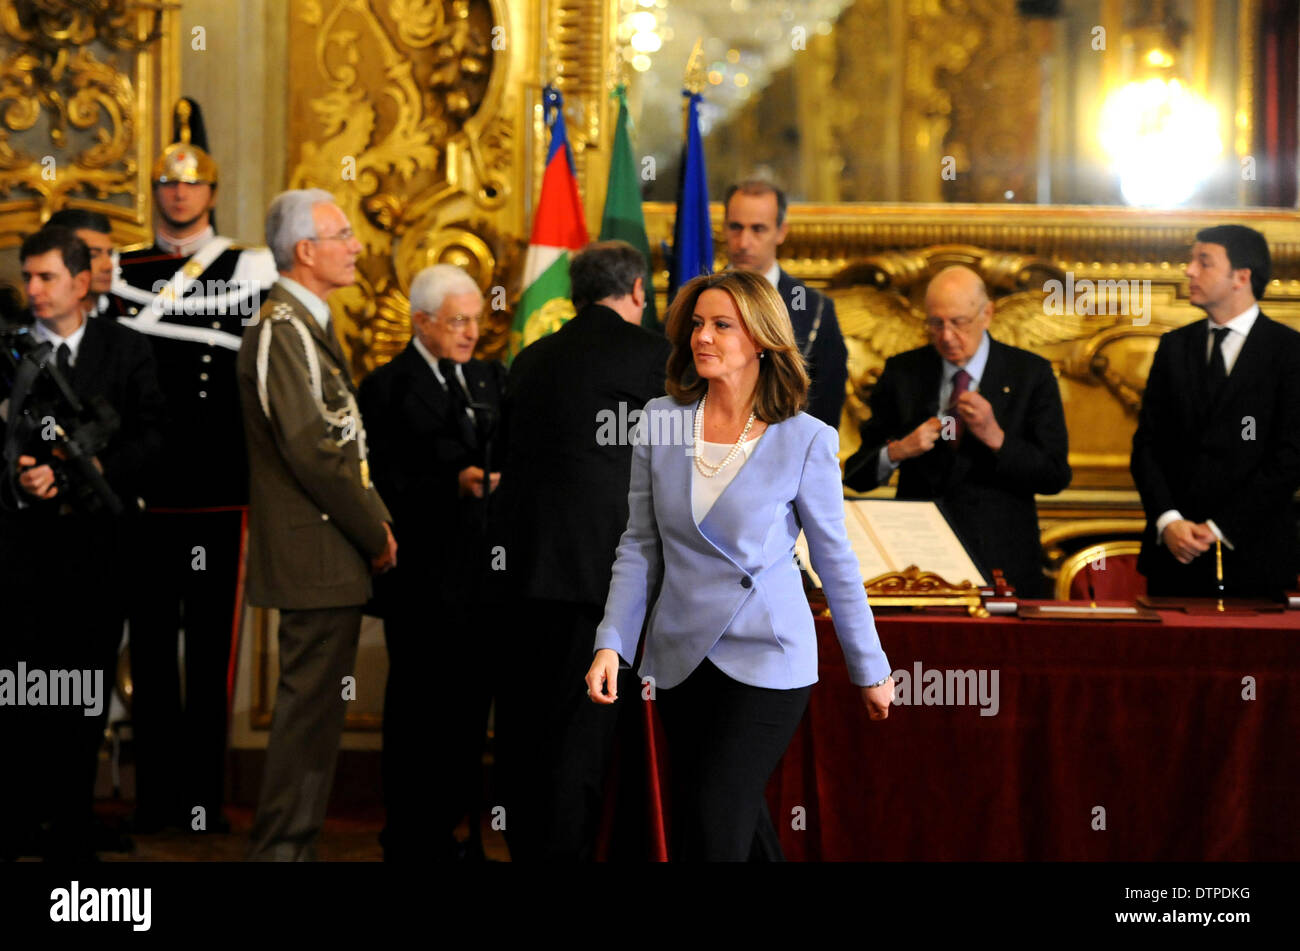 Rome, Italy. 22nd Feb, 2014. Italy' s new health minister Beatrice Lorenzin attends the swearing-in ceremony in Quirinale palace in Rome on February 22, 2014. Italy's new Prime Minister Matteo Renzi and his cabinet ministers were sworn in on Saturday before Italian President Giorgio Napolitano, starting their task to accelerate reforms and revive the troubled economy. Credit:  Xu Nizhi/Xinhua/Alamy Live News Stock Photo